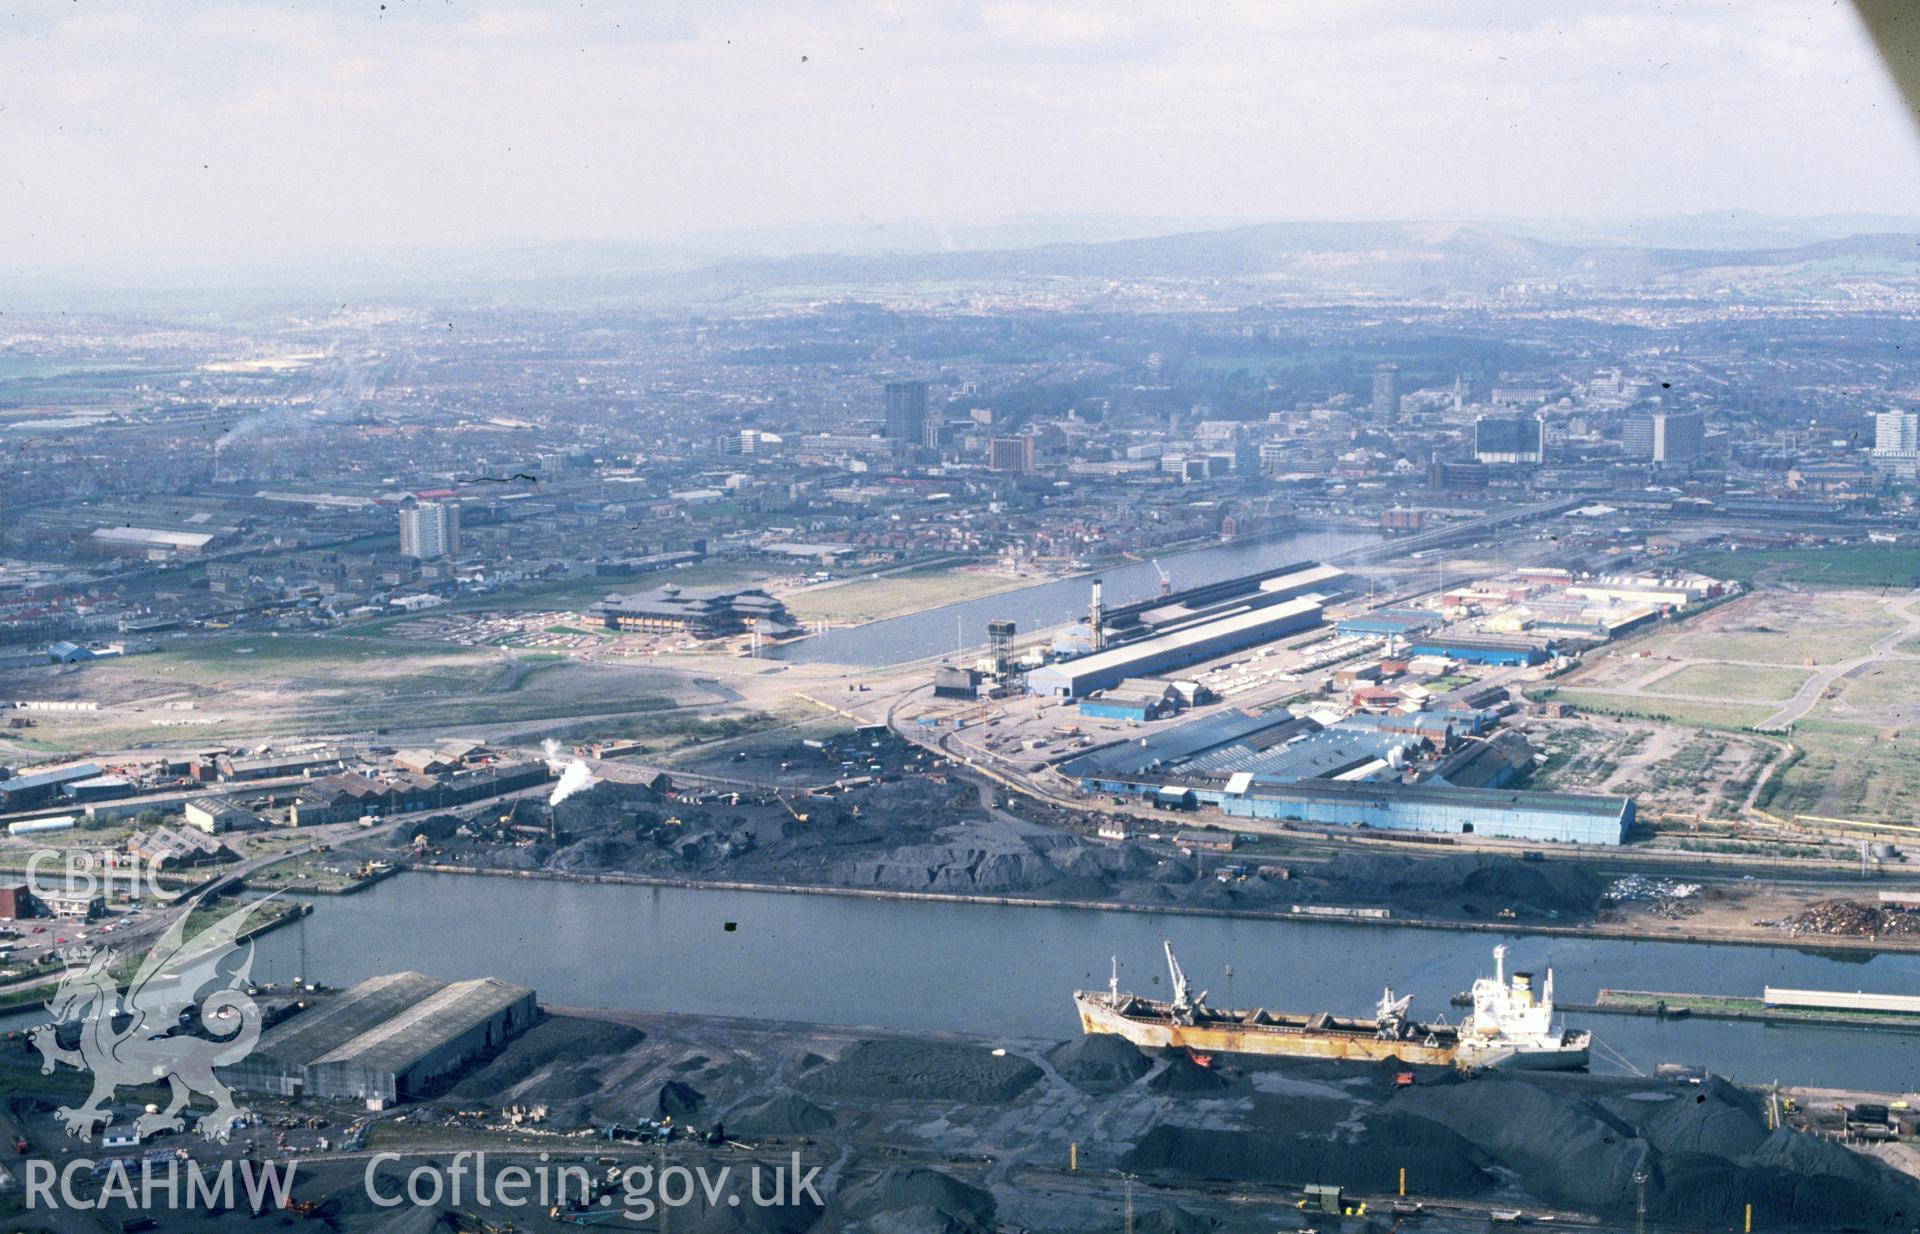 Slide of RCAHMW colour oblique aerial photograph of Roath Dock, Cardiff Bay, taken by C.R. Musson, 26/3/1990.